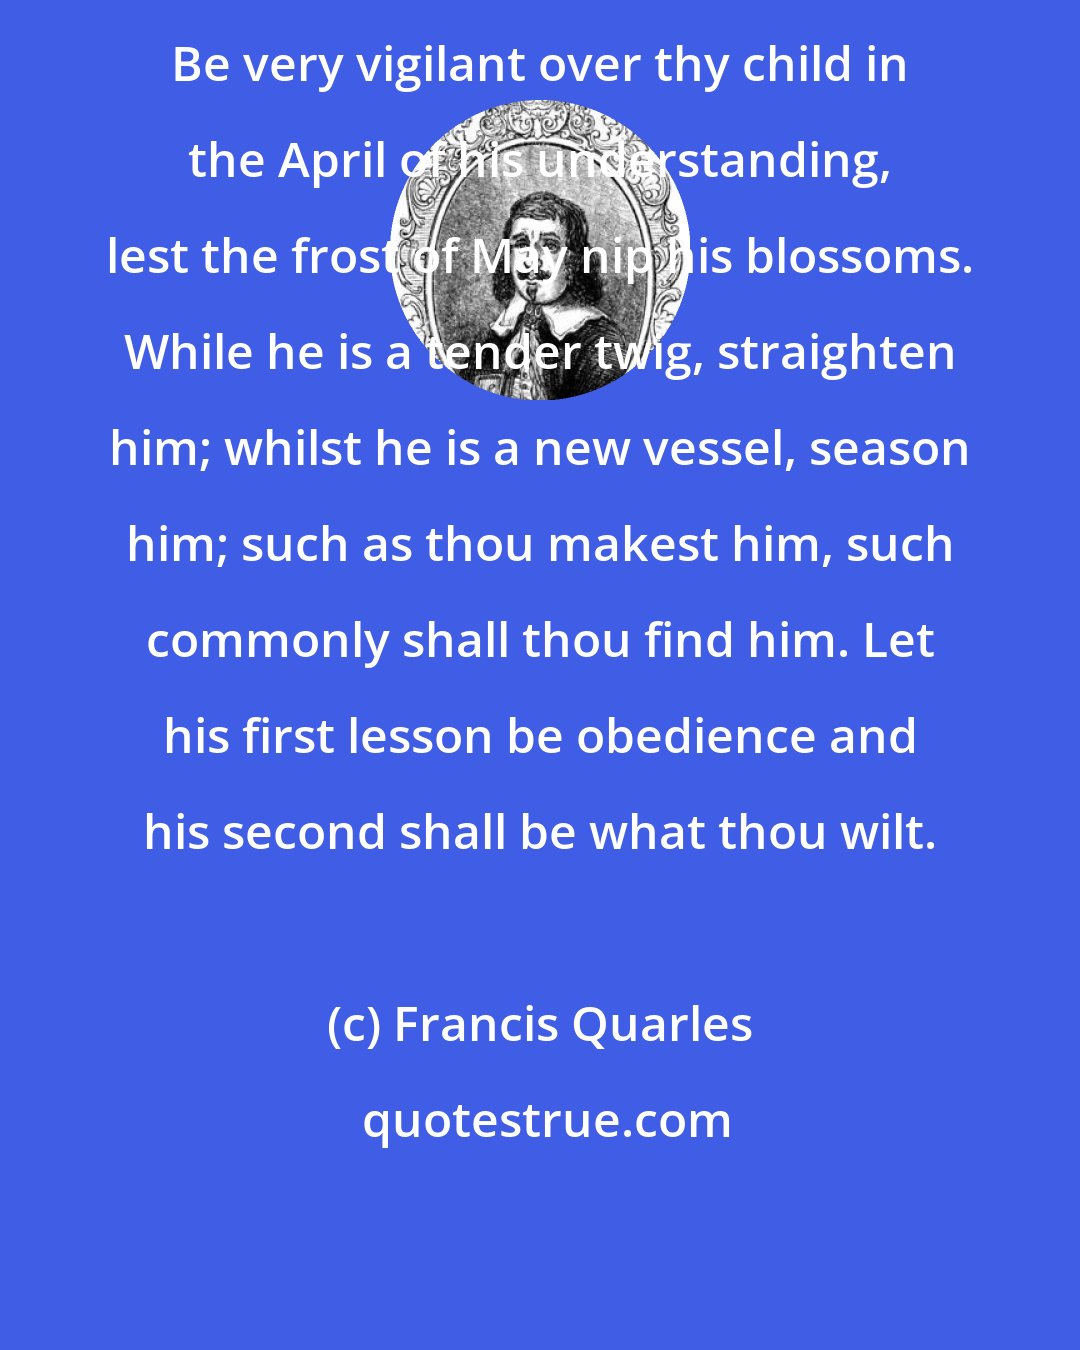 Francis Quarles: Be very vigilant over thy child in the April of his understanding, lest the frost of May nip his blossoms. While he is a tender twig, straighten him; whilst he is a new vessel, season him; such as thou makest him, such commonly shall thou find him. Let his first lesson be obedience and his second shall be what thou wilt.